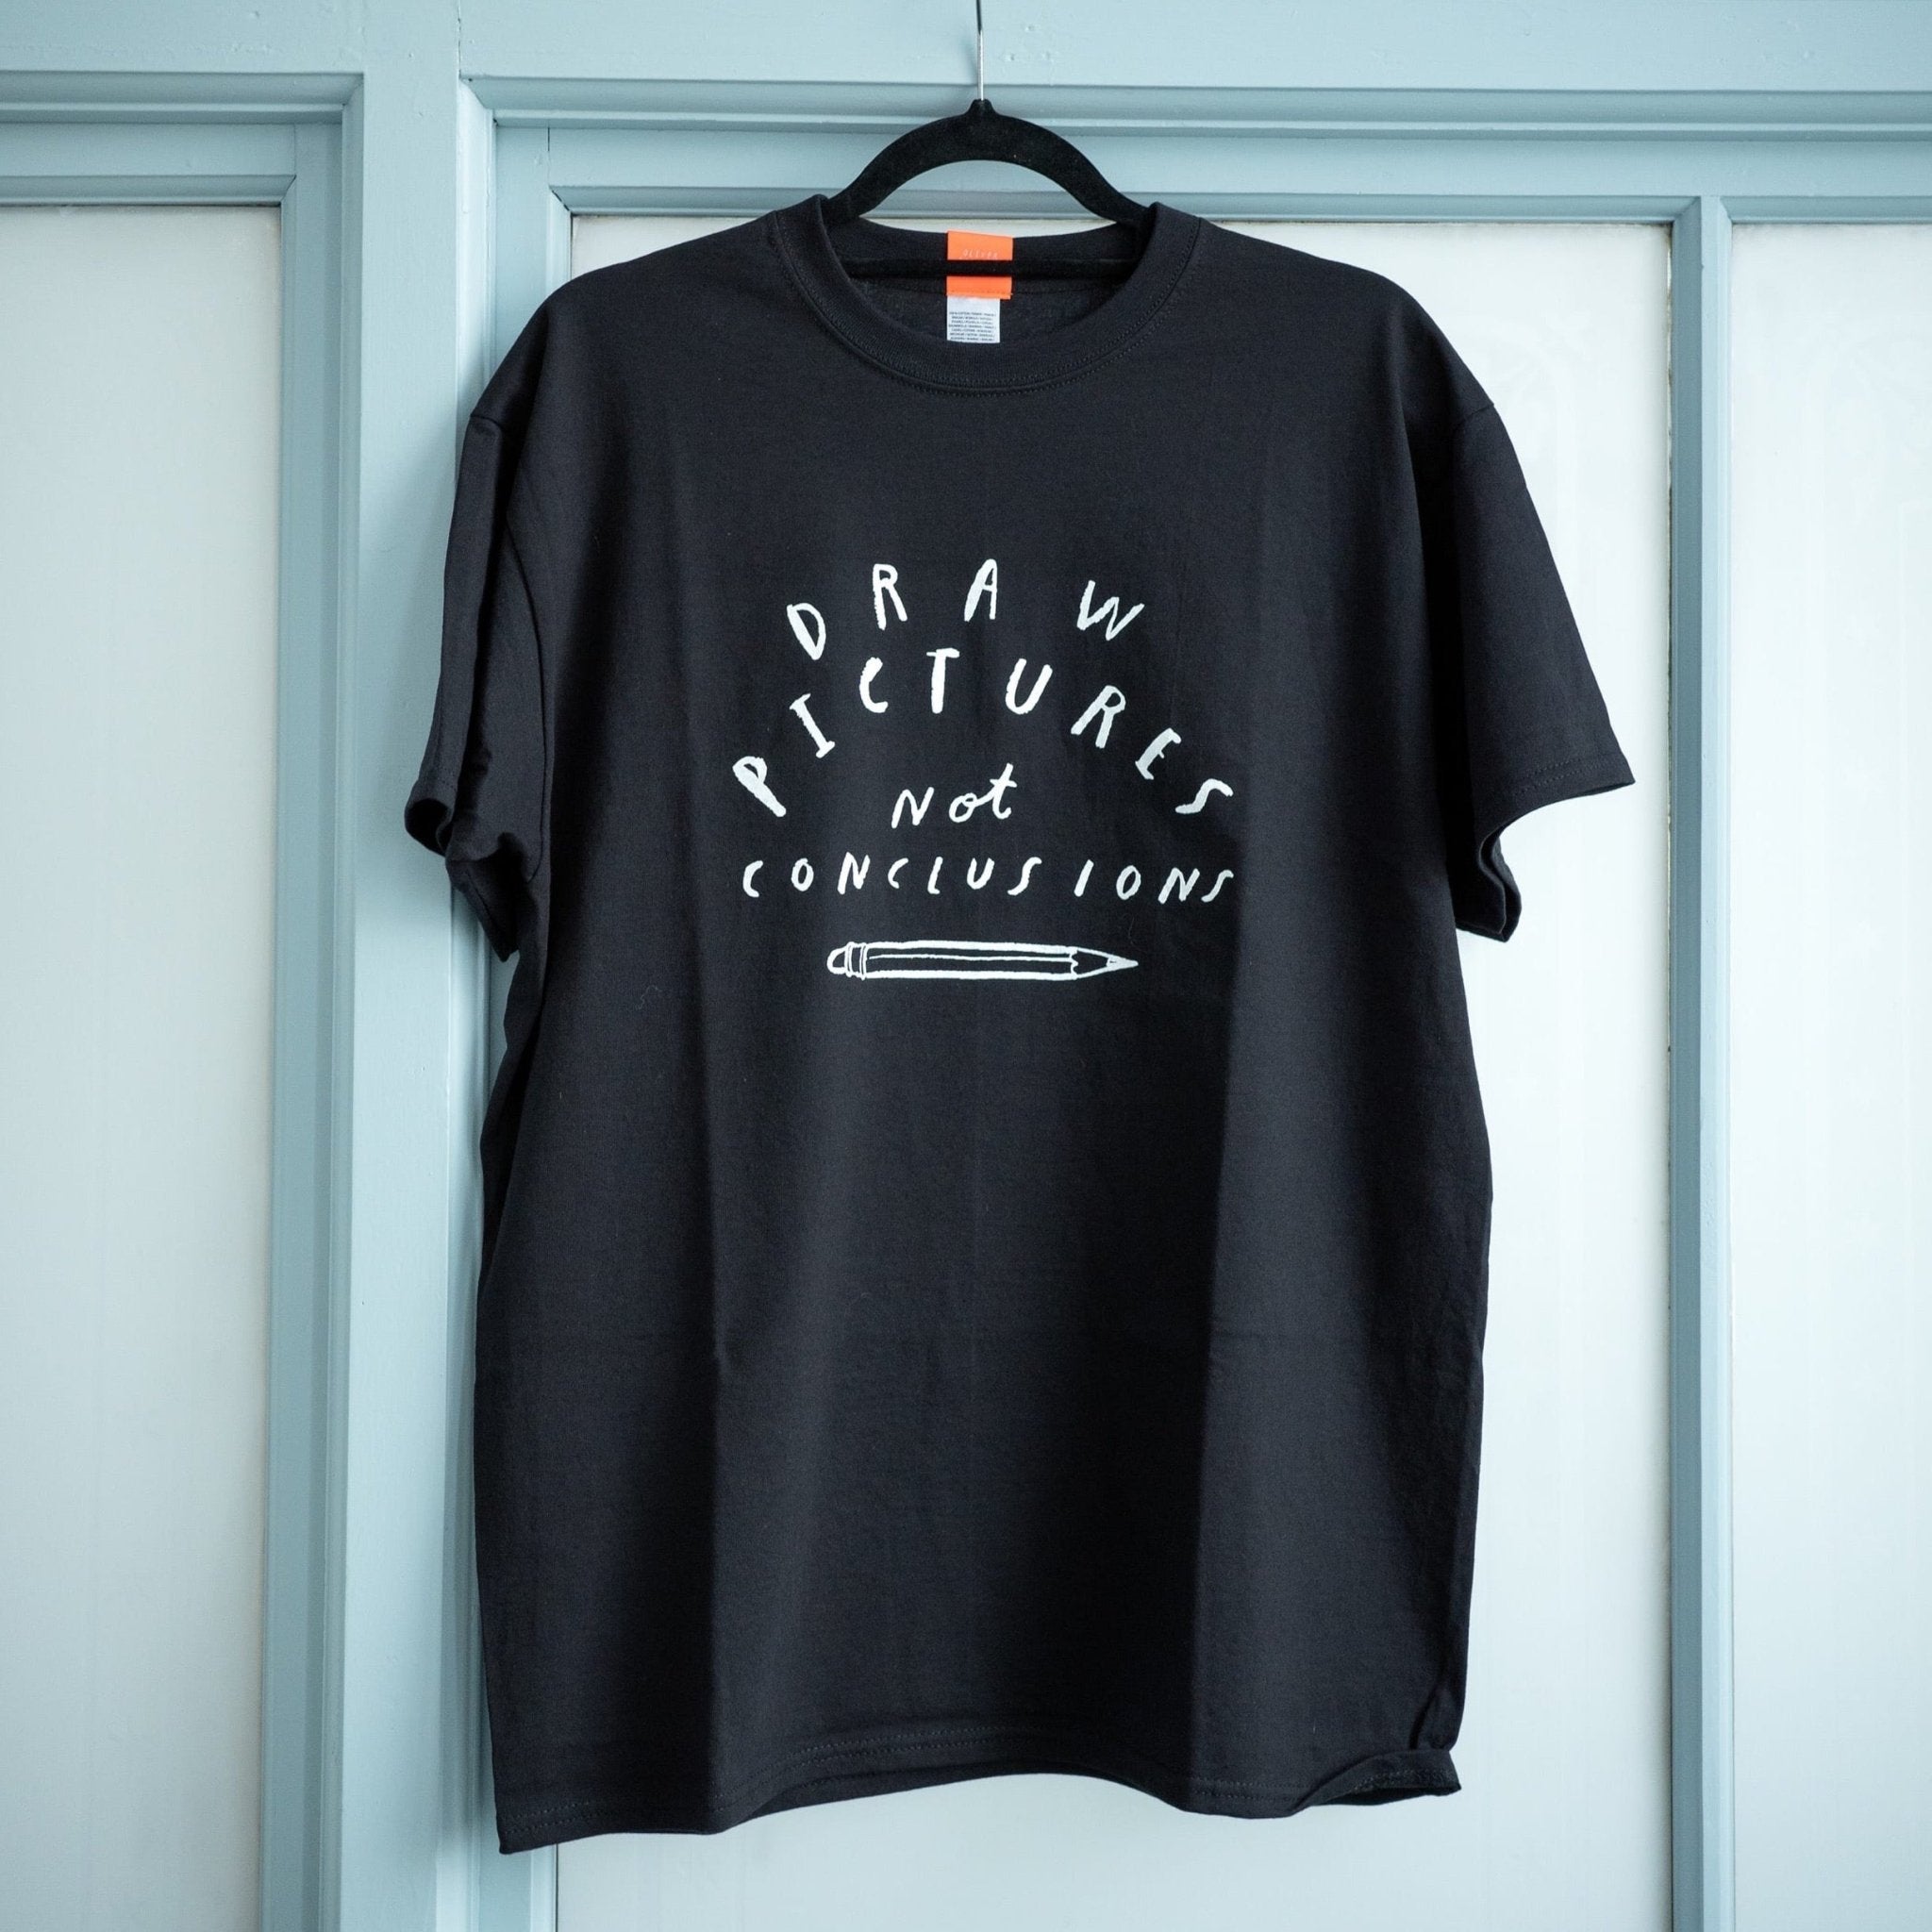 Oliver Jeffers 'Draw Pictures Not Conclusions' T-Shirt